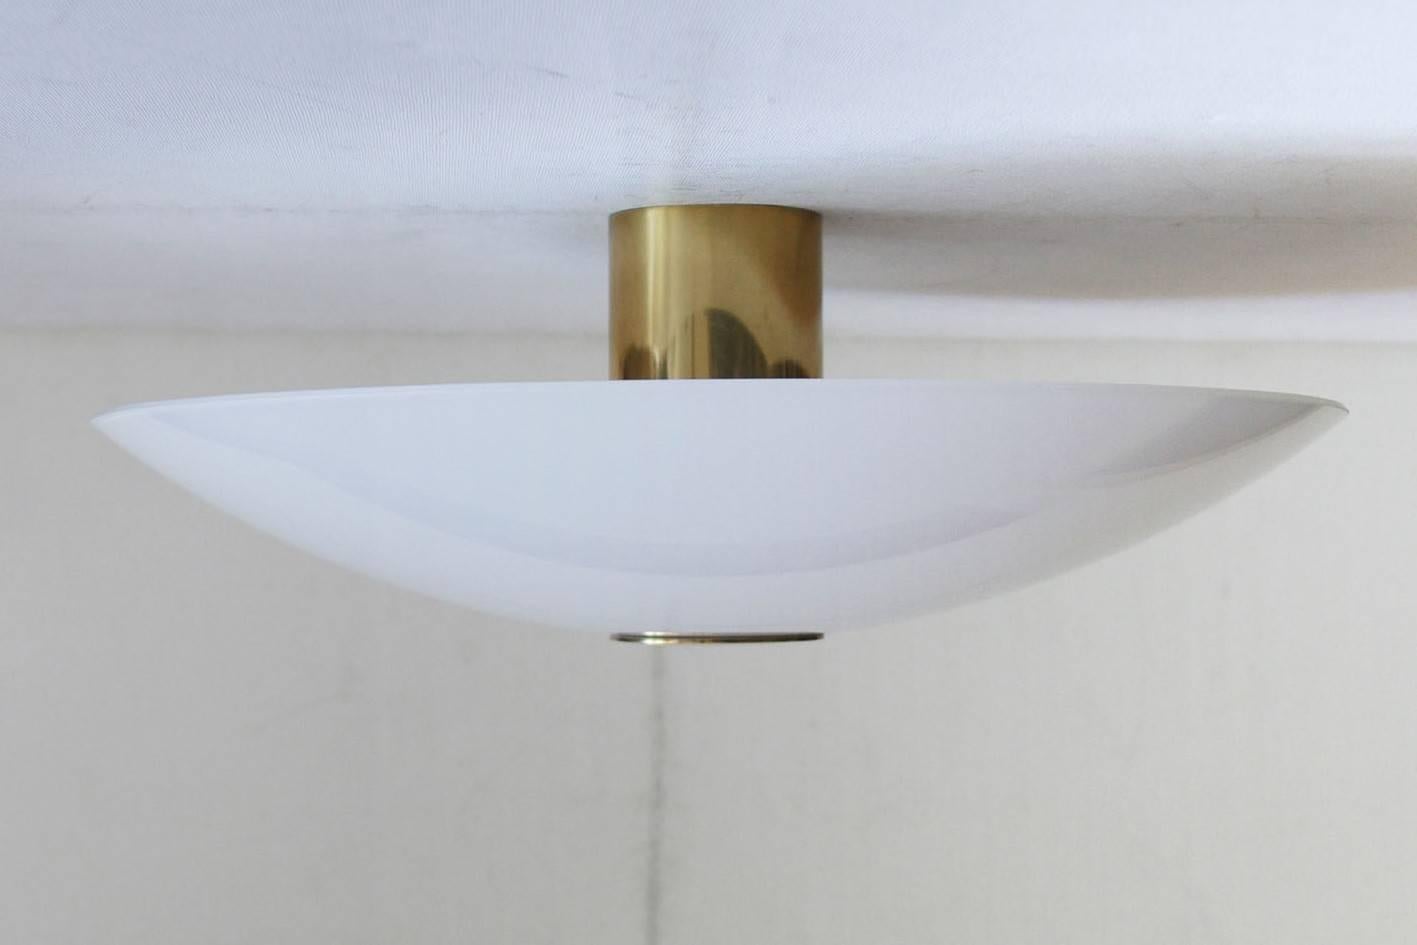 White-opal glass and brass wall or ceiling flush mounts, Germany

Lamp sockets: Five x E27 (US E26).